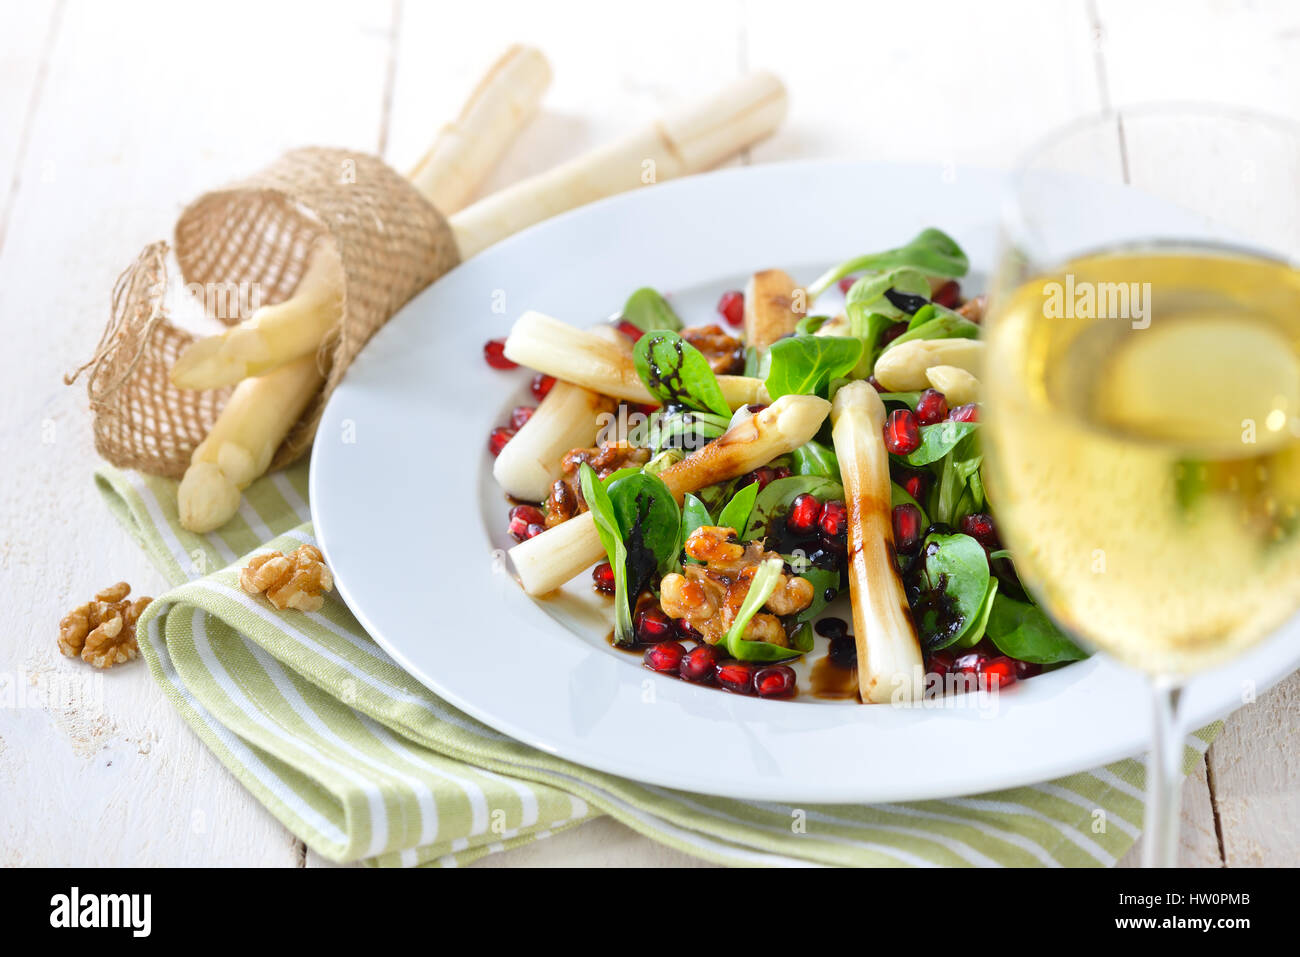 White asparagus on lamb's lettuce with candied walnuts, pomegranate seeds and balsamic vinegar, served with a glass of fruity white wine Stock Photo